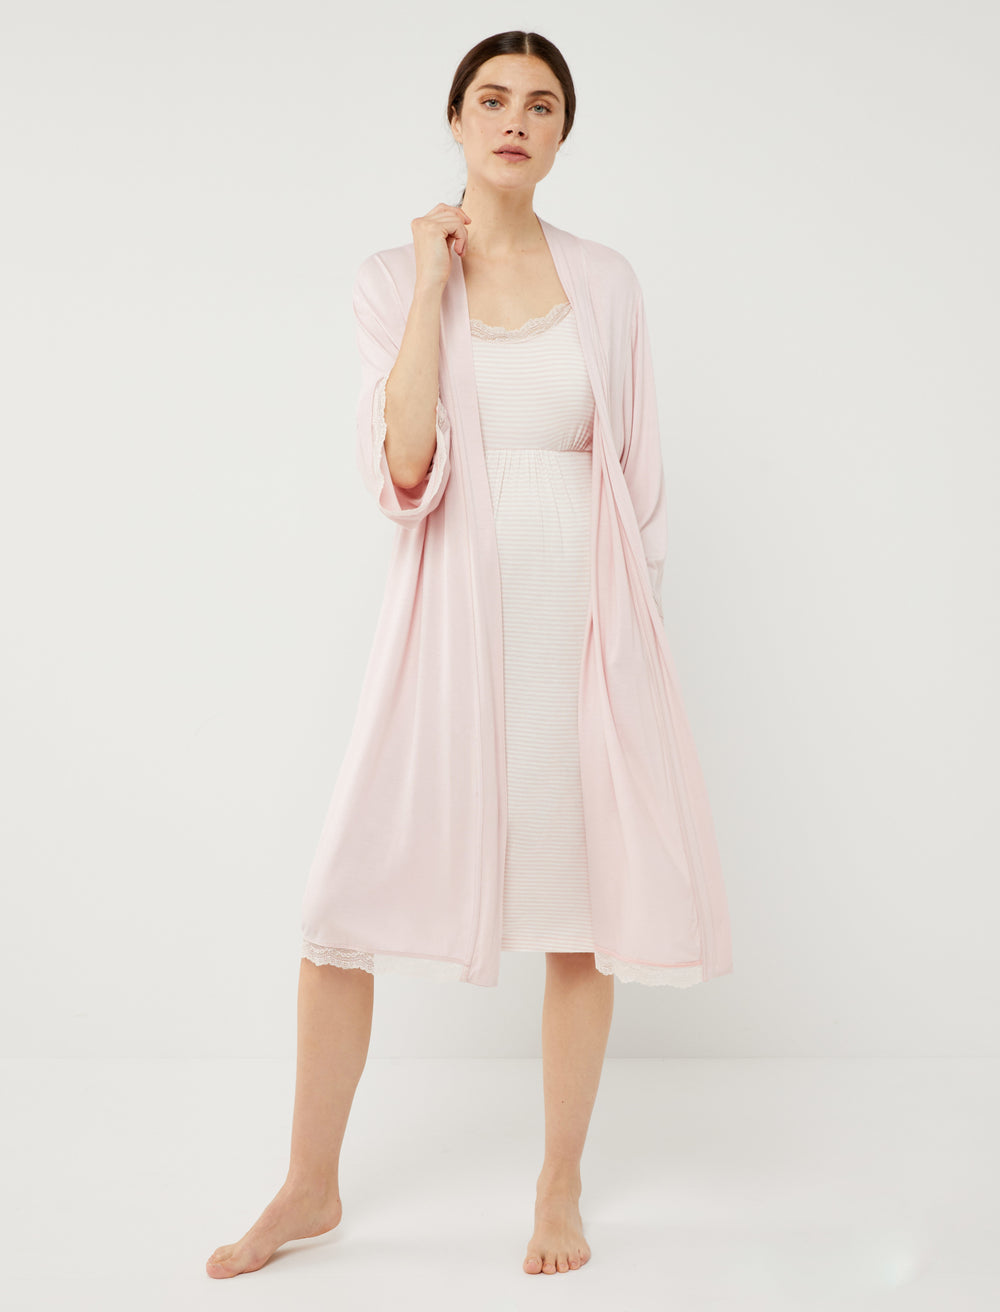 The Best Nursing Nightgown, Robe, and Pajama Sets That Are